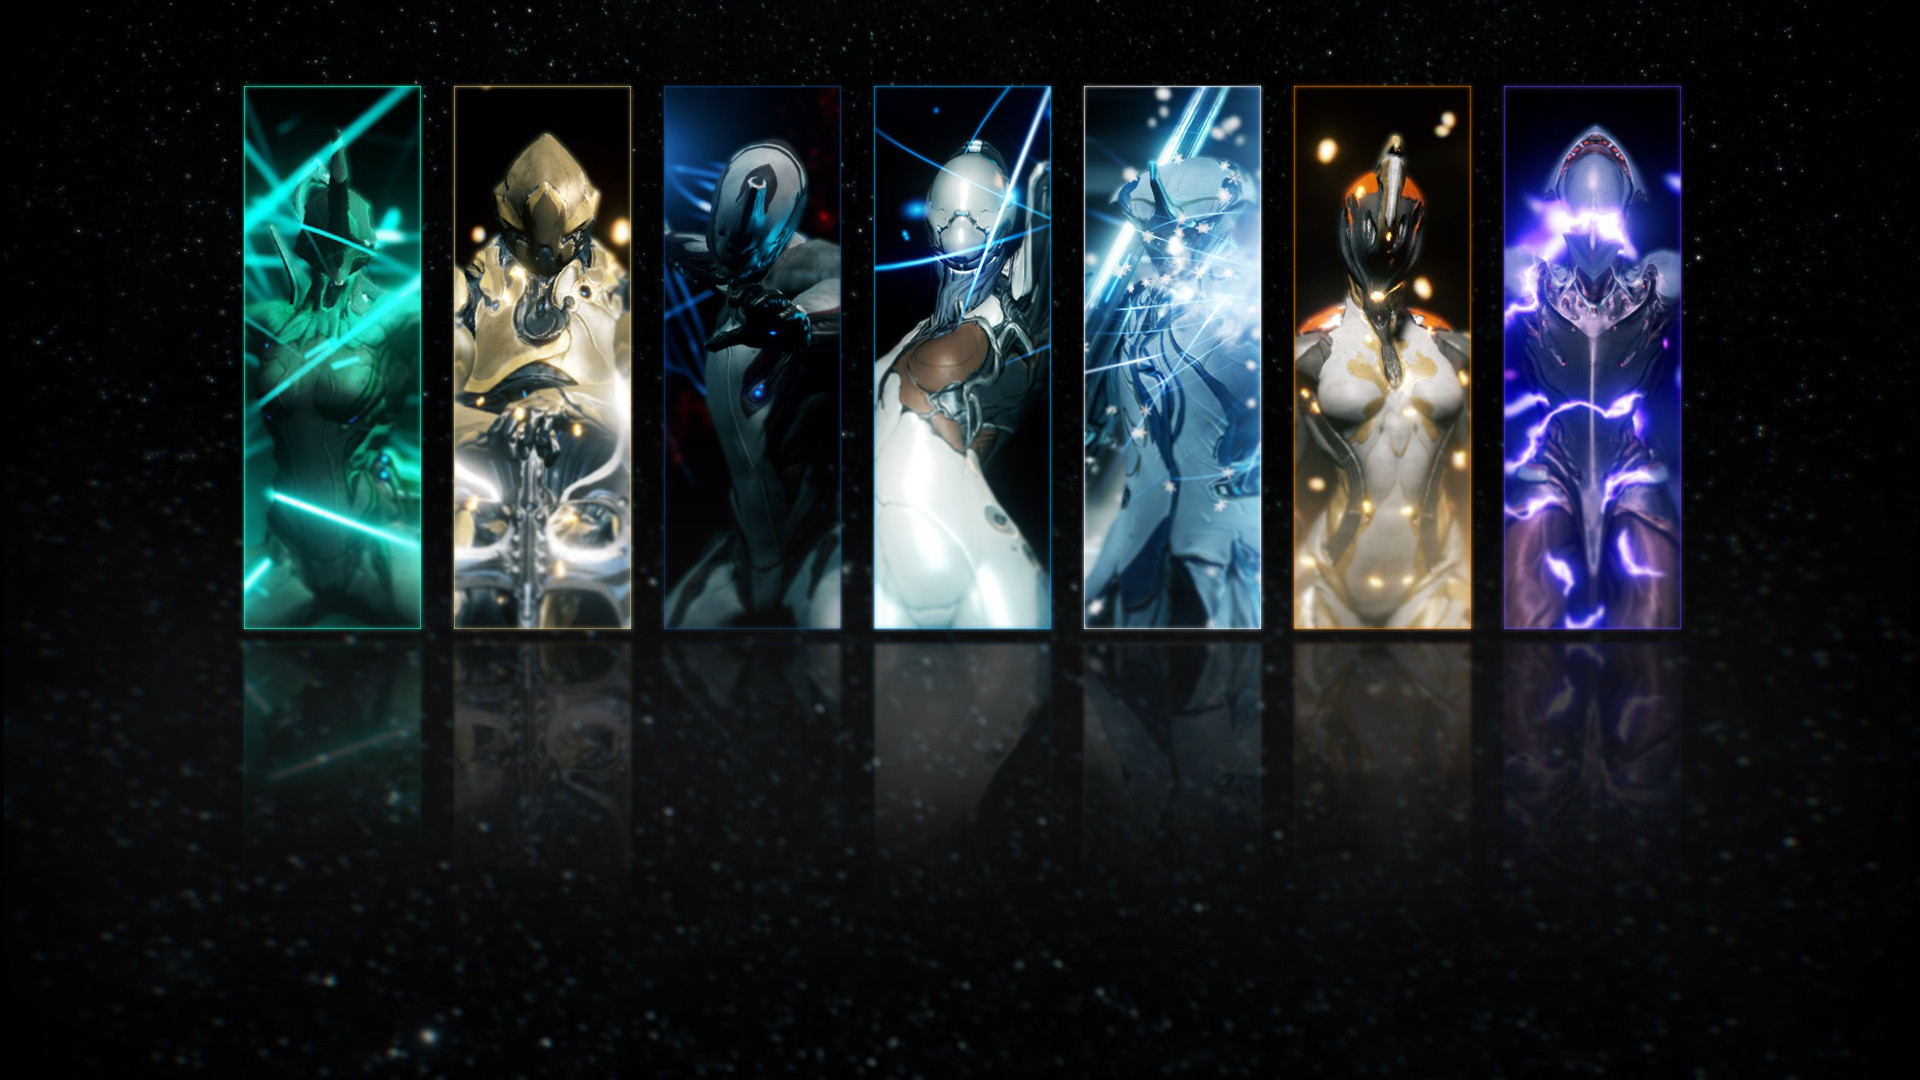 Made Warframe Wallpaper For Unoffical Contest Maybe